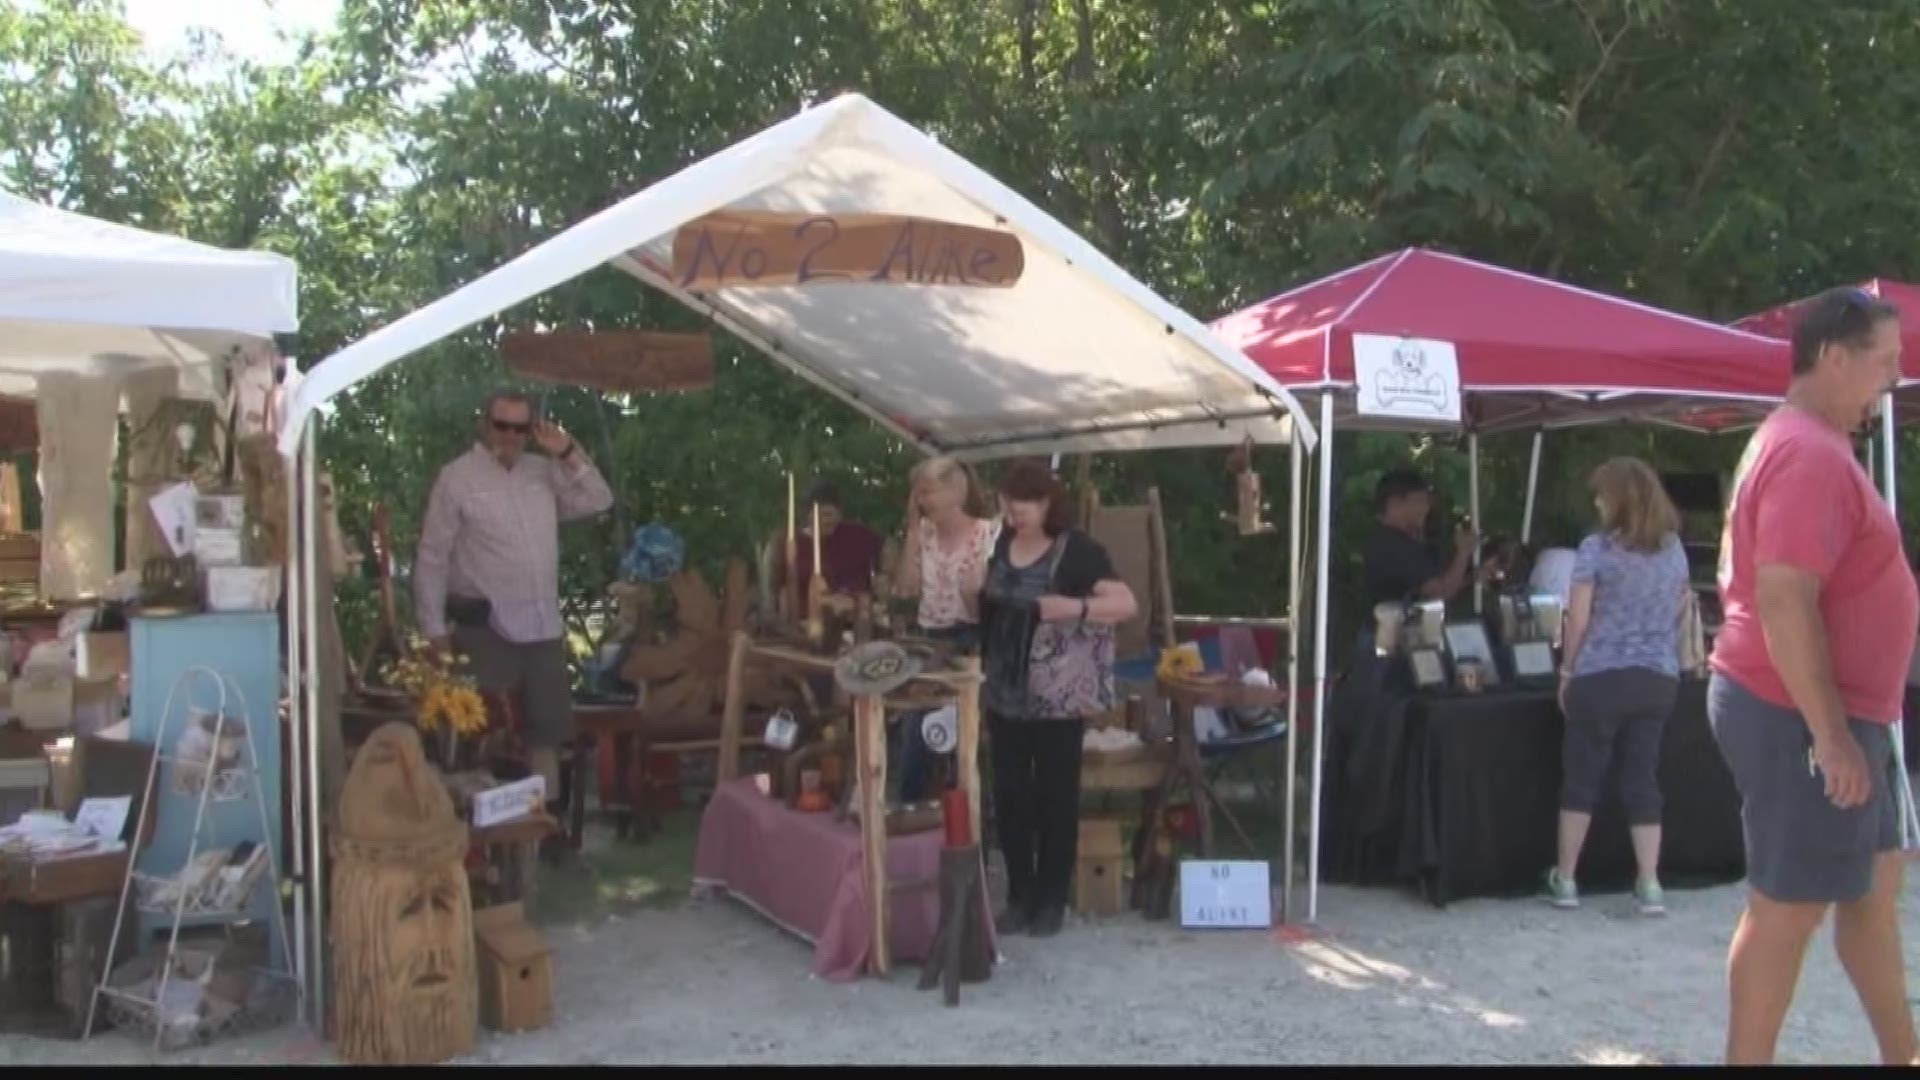 This is the third market 7th Street Salvage has held, where they expect thousands of people to show up and browse around.